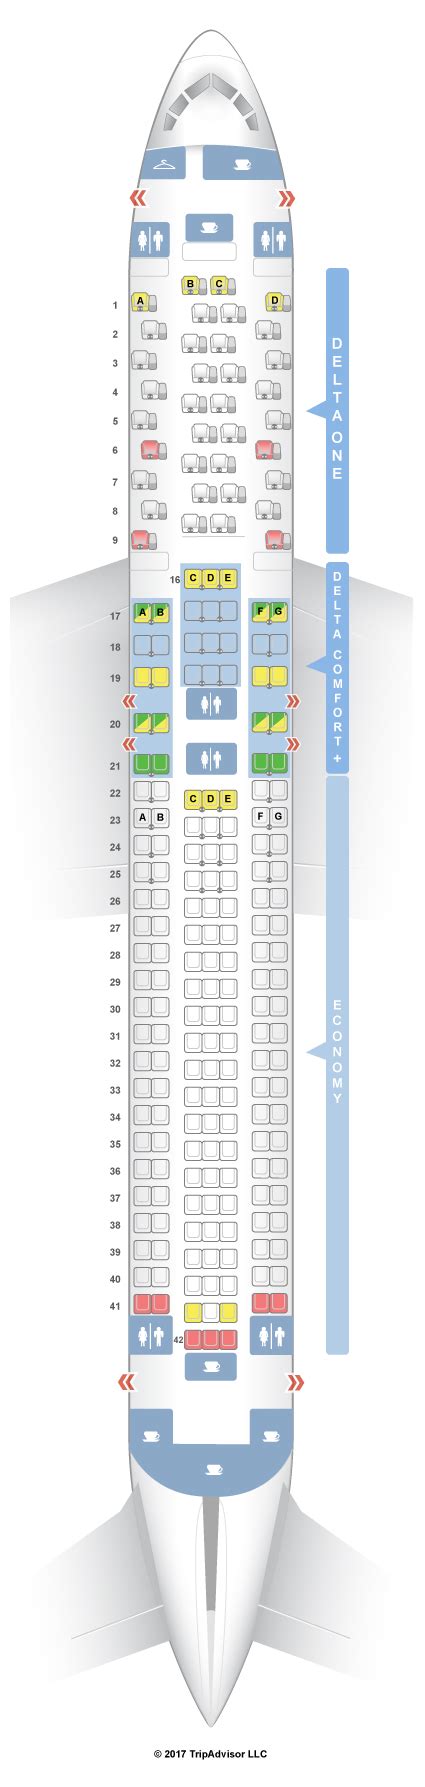 Delta 767-300 seatguru. For your next Delta flight, use this seating chart to get the most comfortable seats, legroom, and recline on . 